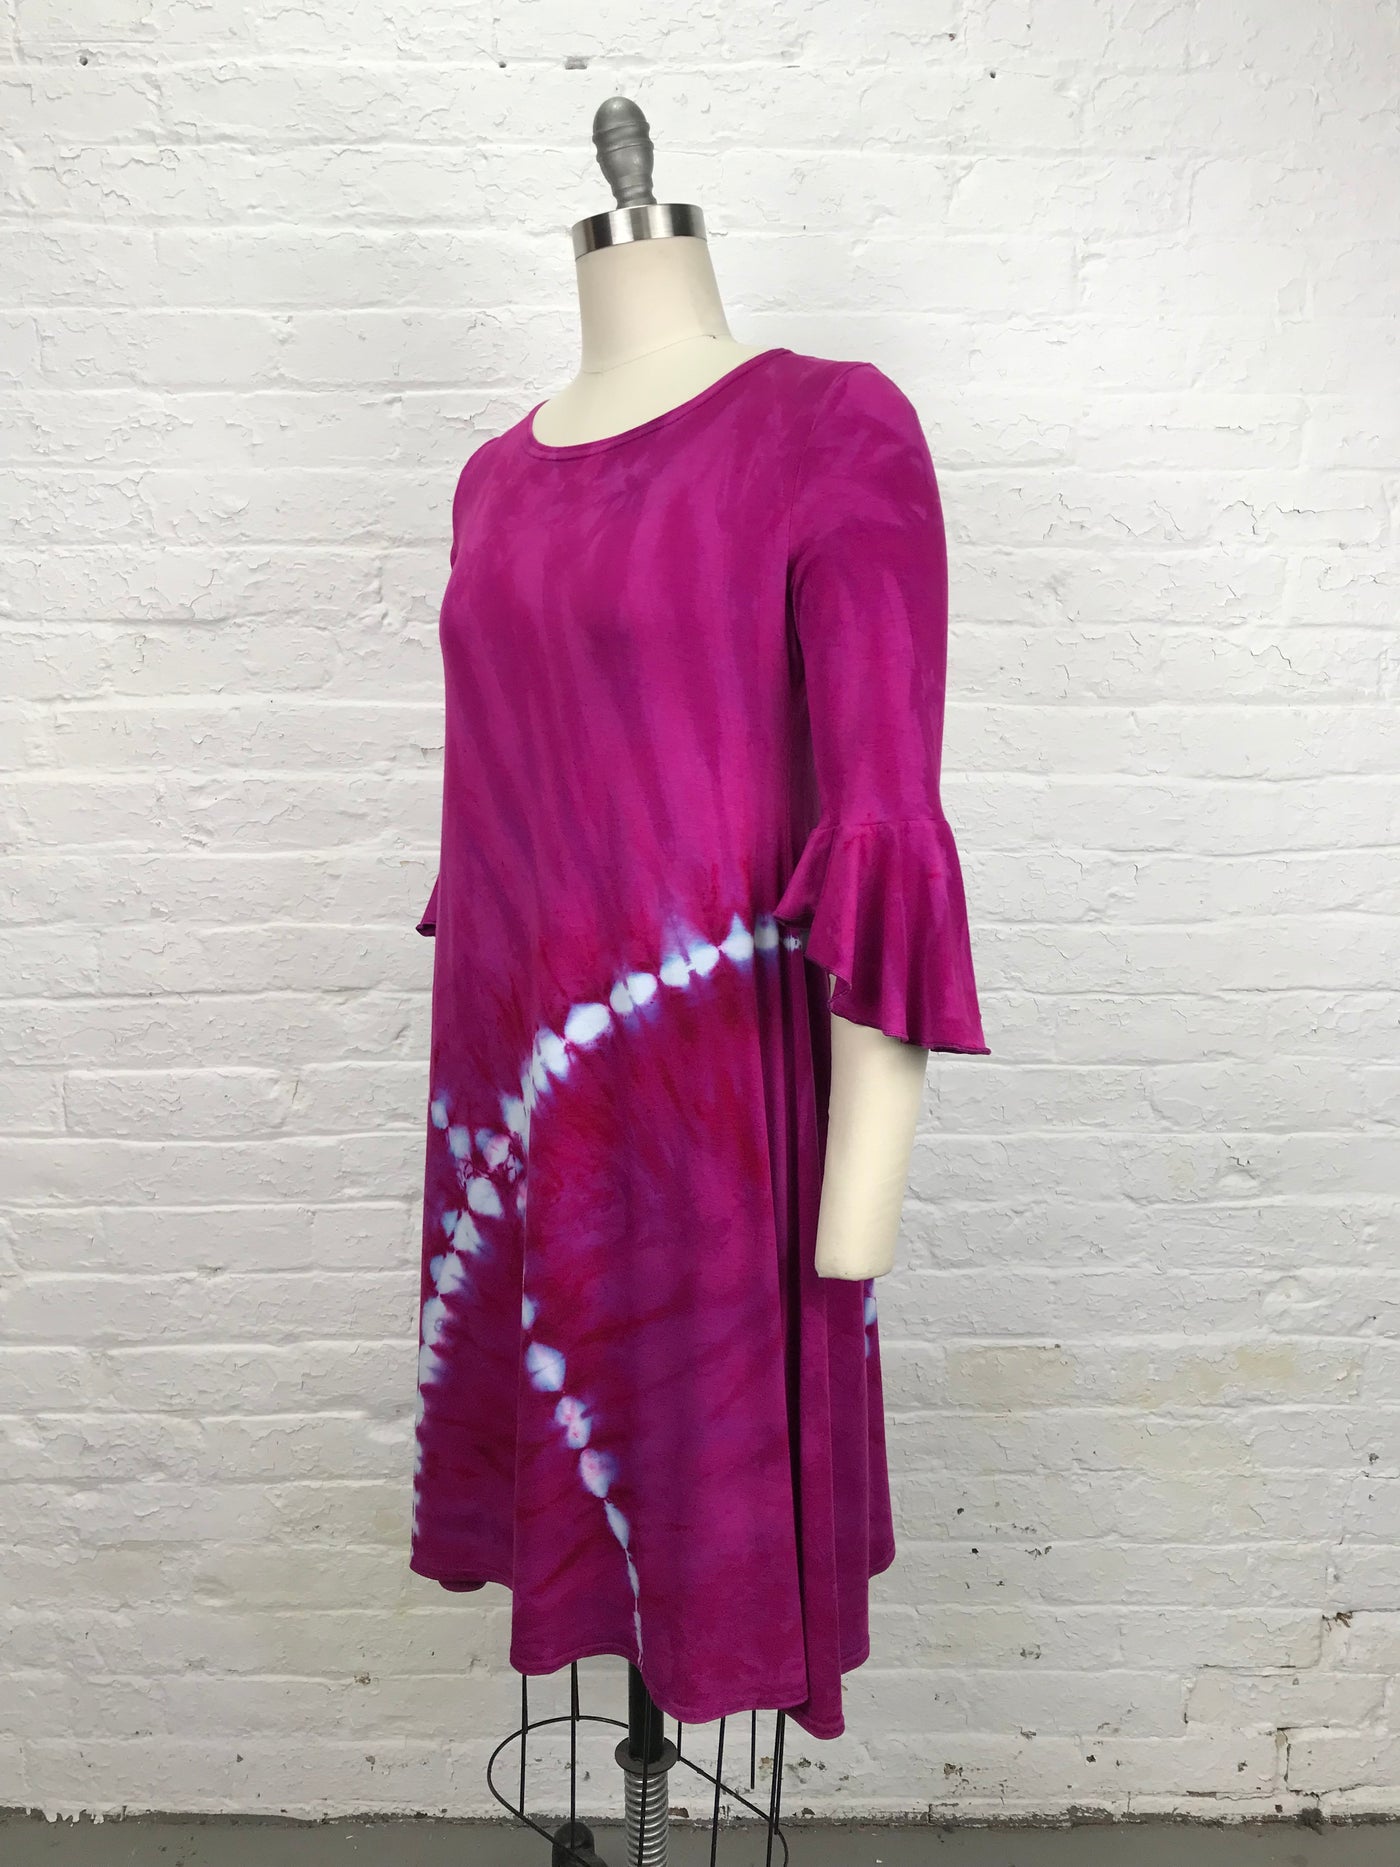 Flamenco Lucille Dress in Candy Swirl - Medium - side view